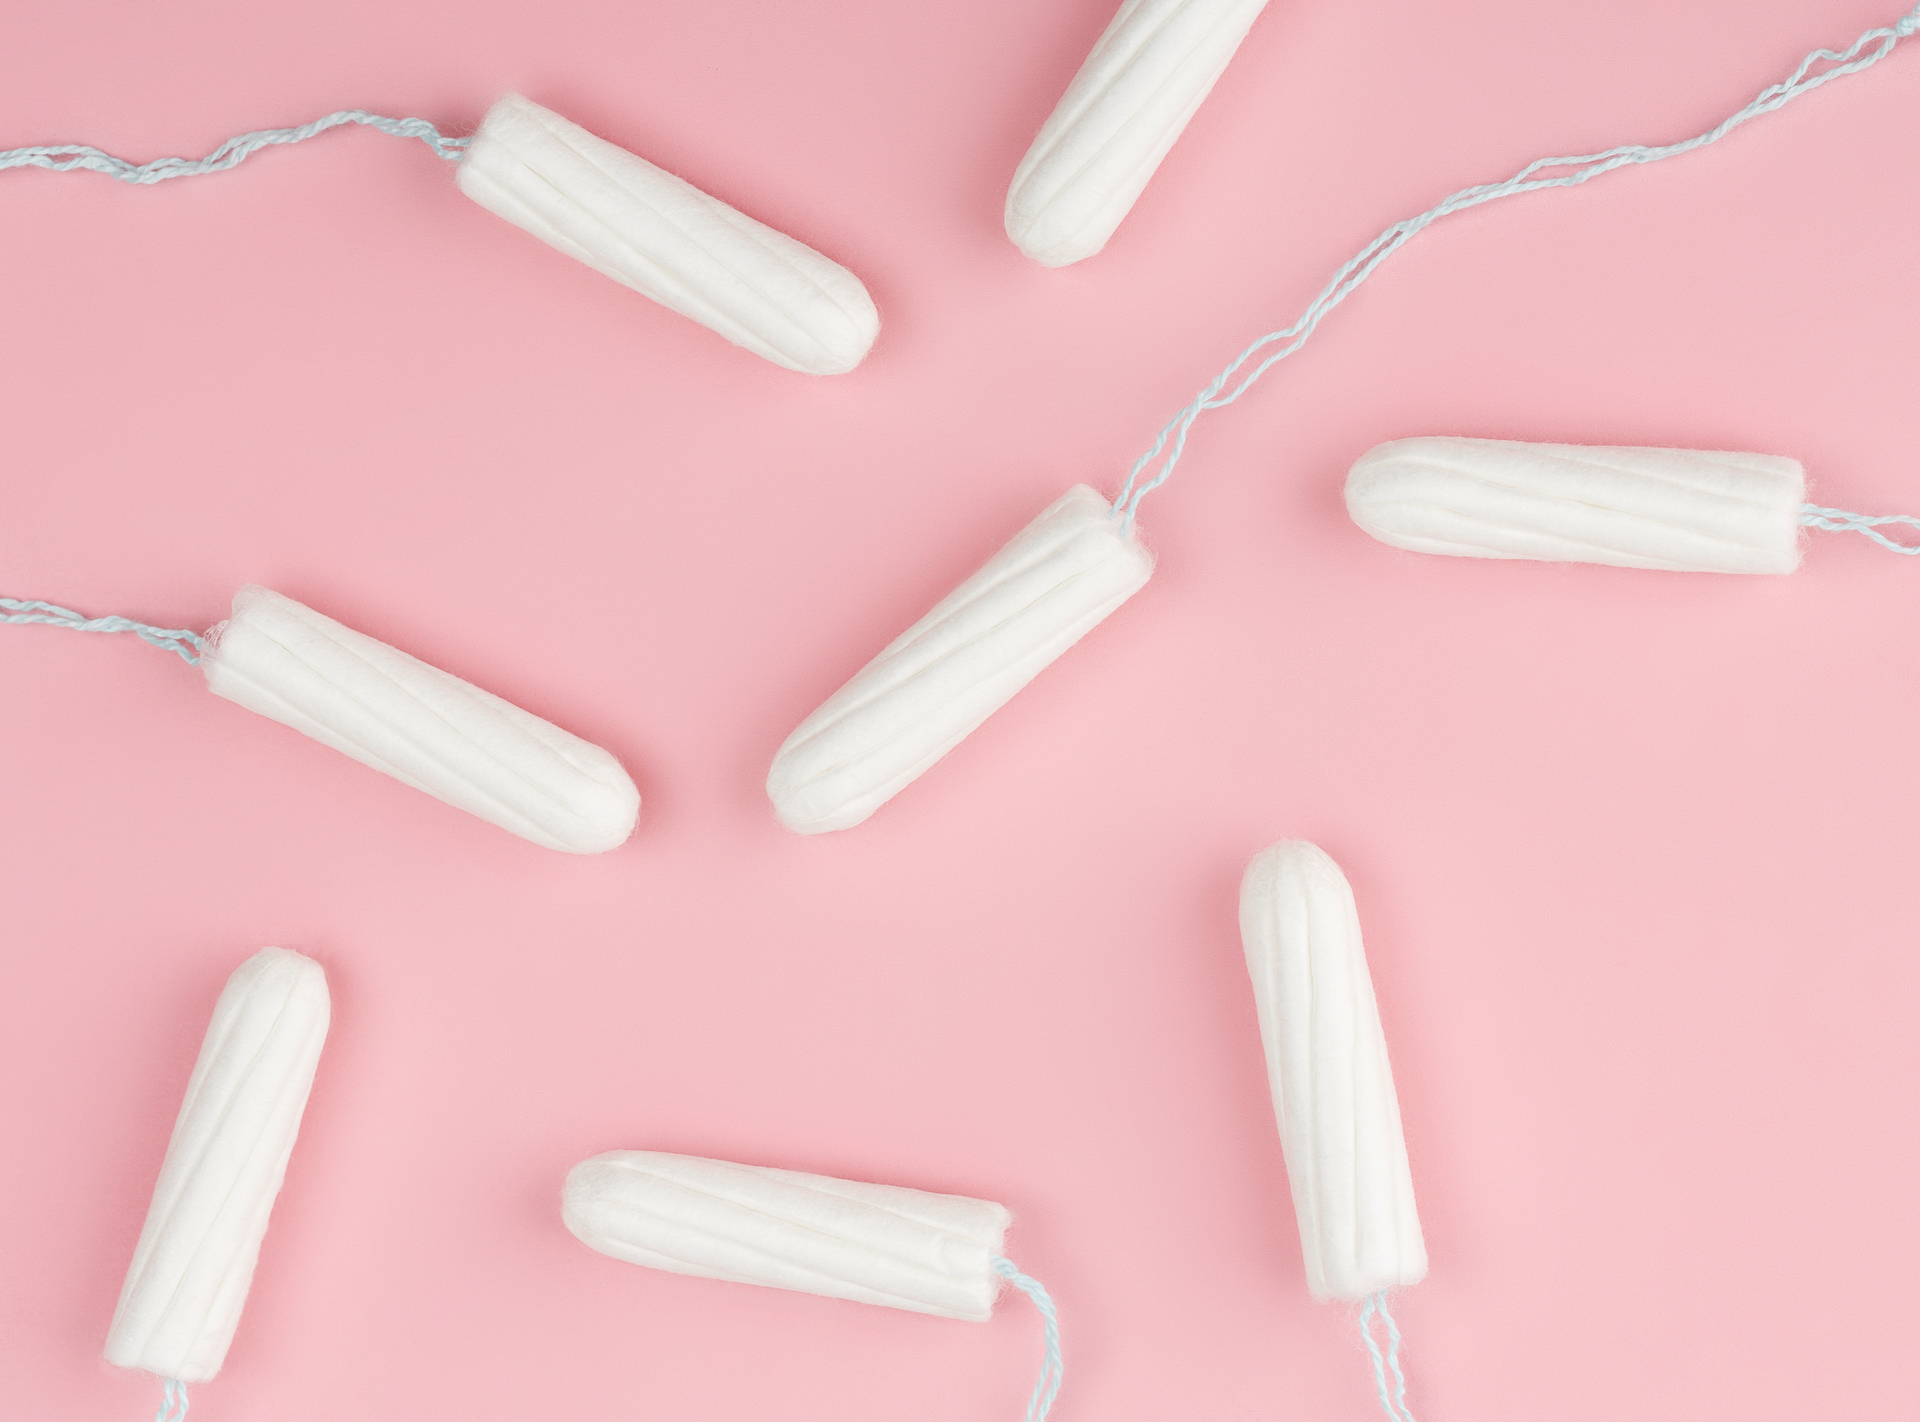 From already not being tax-exempt to now facing a national shortage, tampons are the latest disruption in the supply chain. Women have been struggling to purchase tampons due to inflation, but now, they are nowhere to be found on local drugstore shelves. 